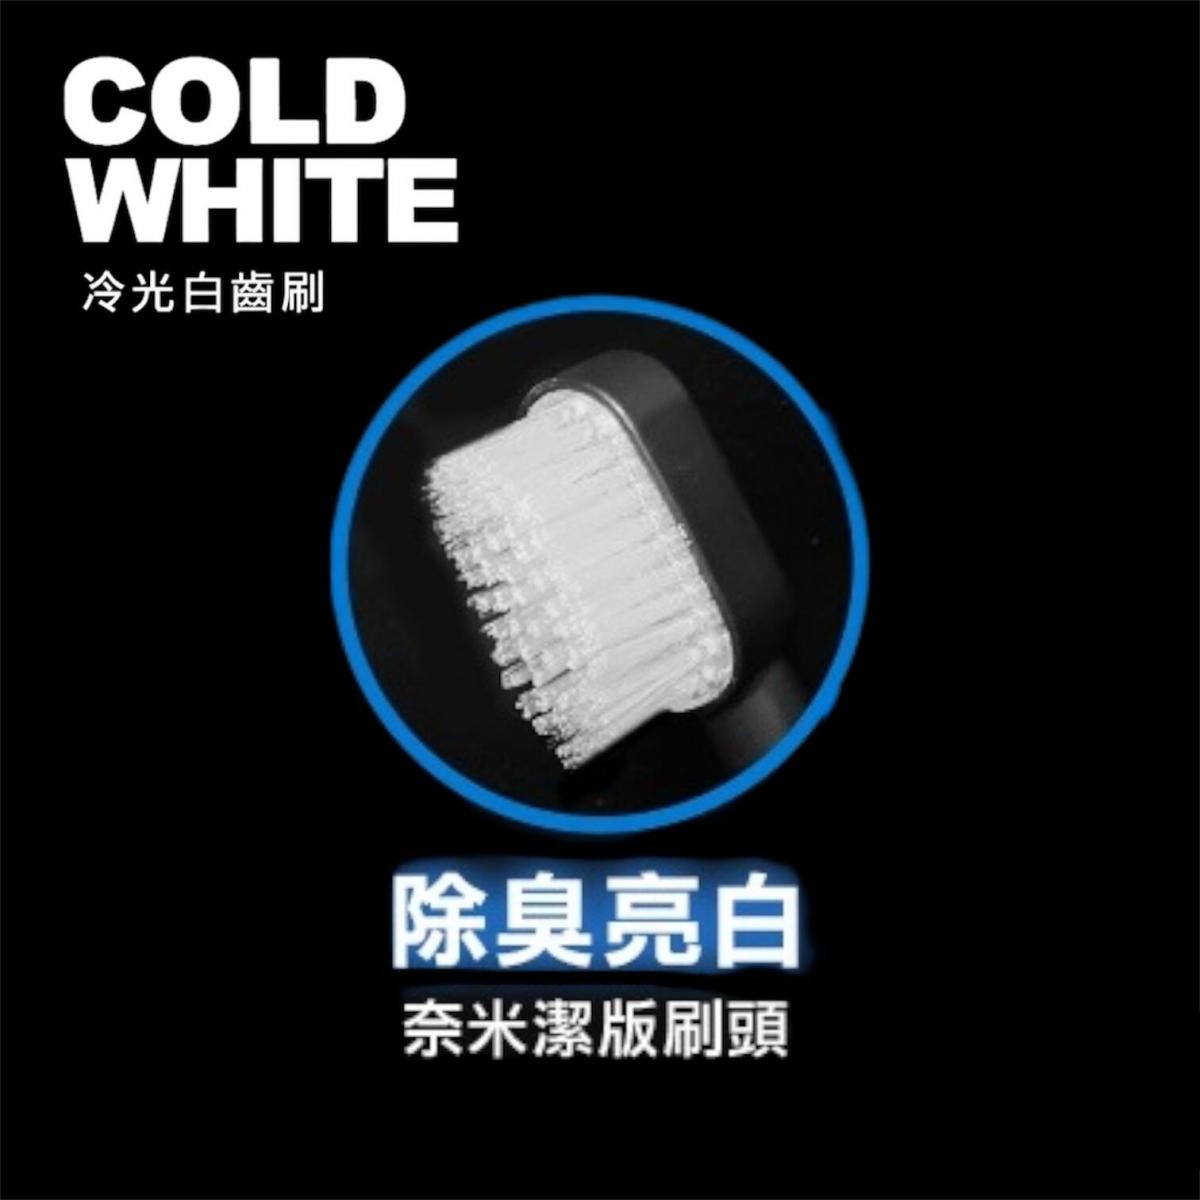 Future Lab - Cold White Nano Clean Brush Head Refill Pack for Cold White Teeth Brush (3 pieces)